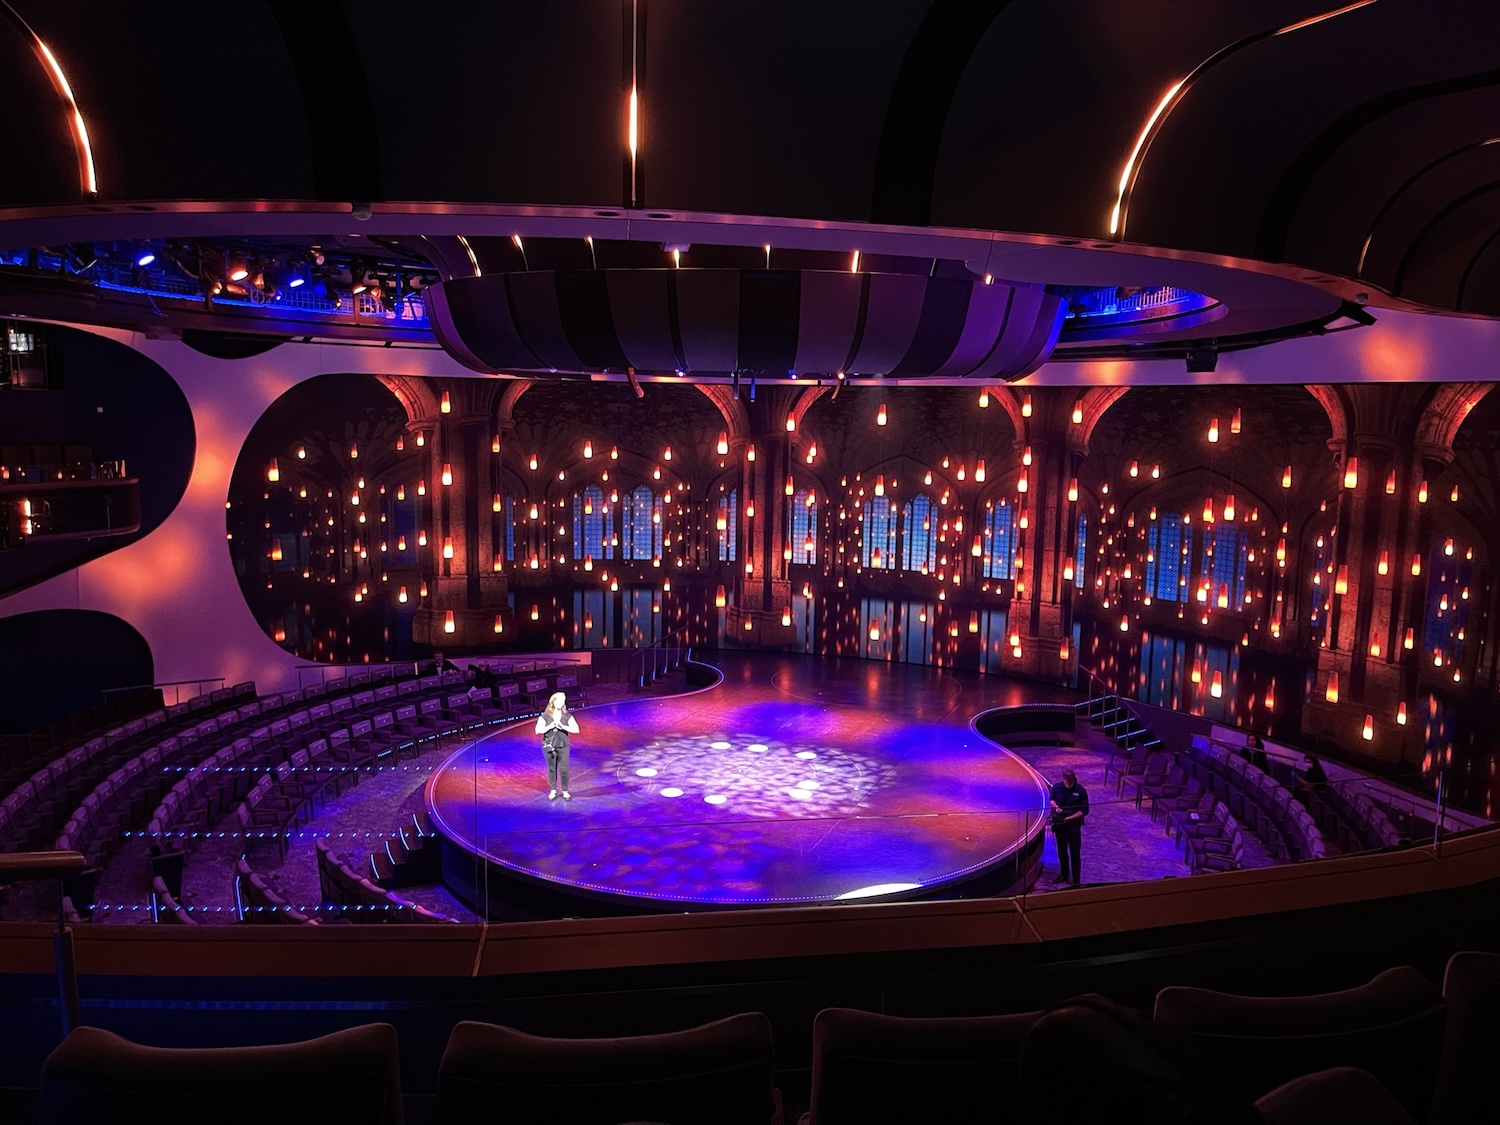 An opulent theater interior illuminated by blue and amber lights with a person standing on the central stage and another by the seating area.